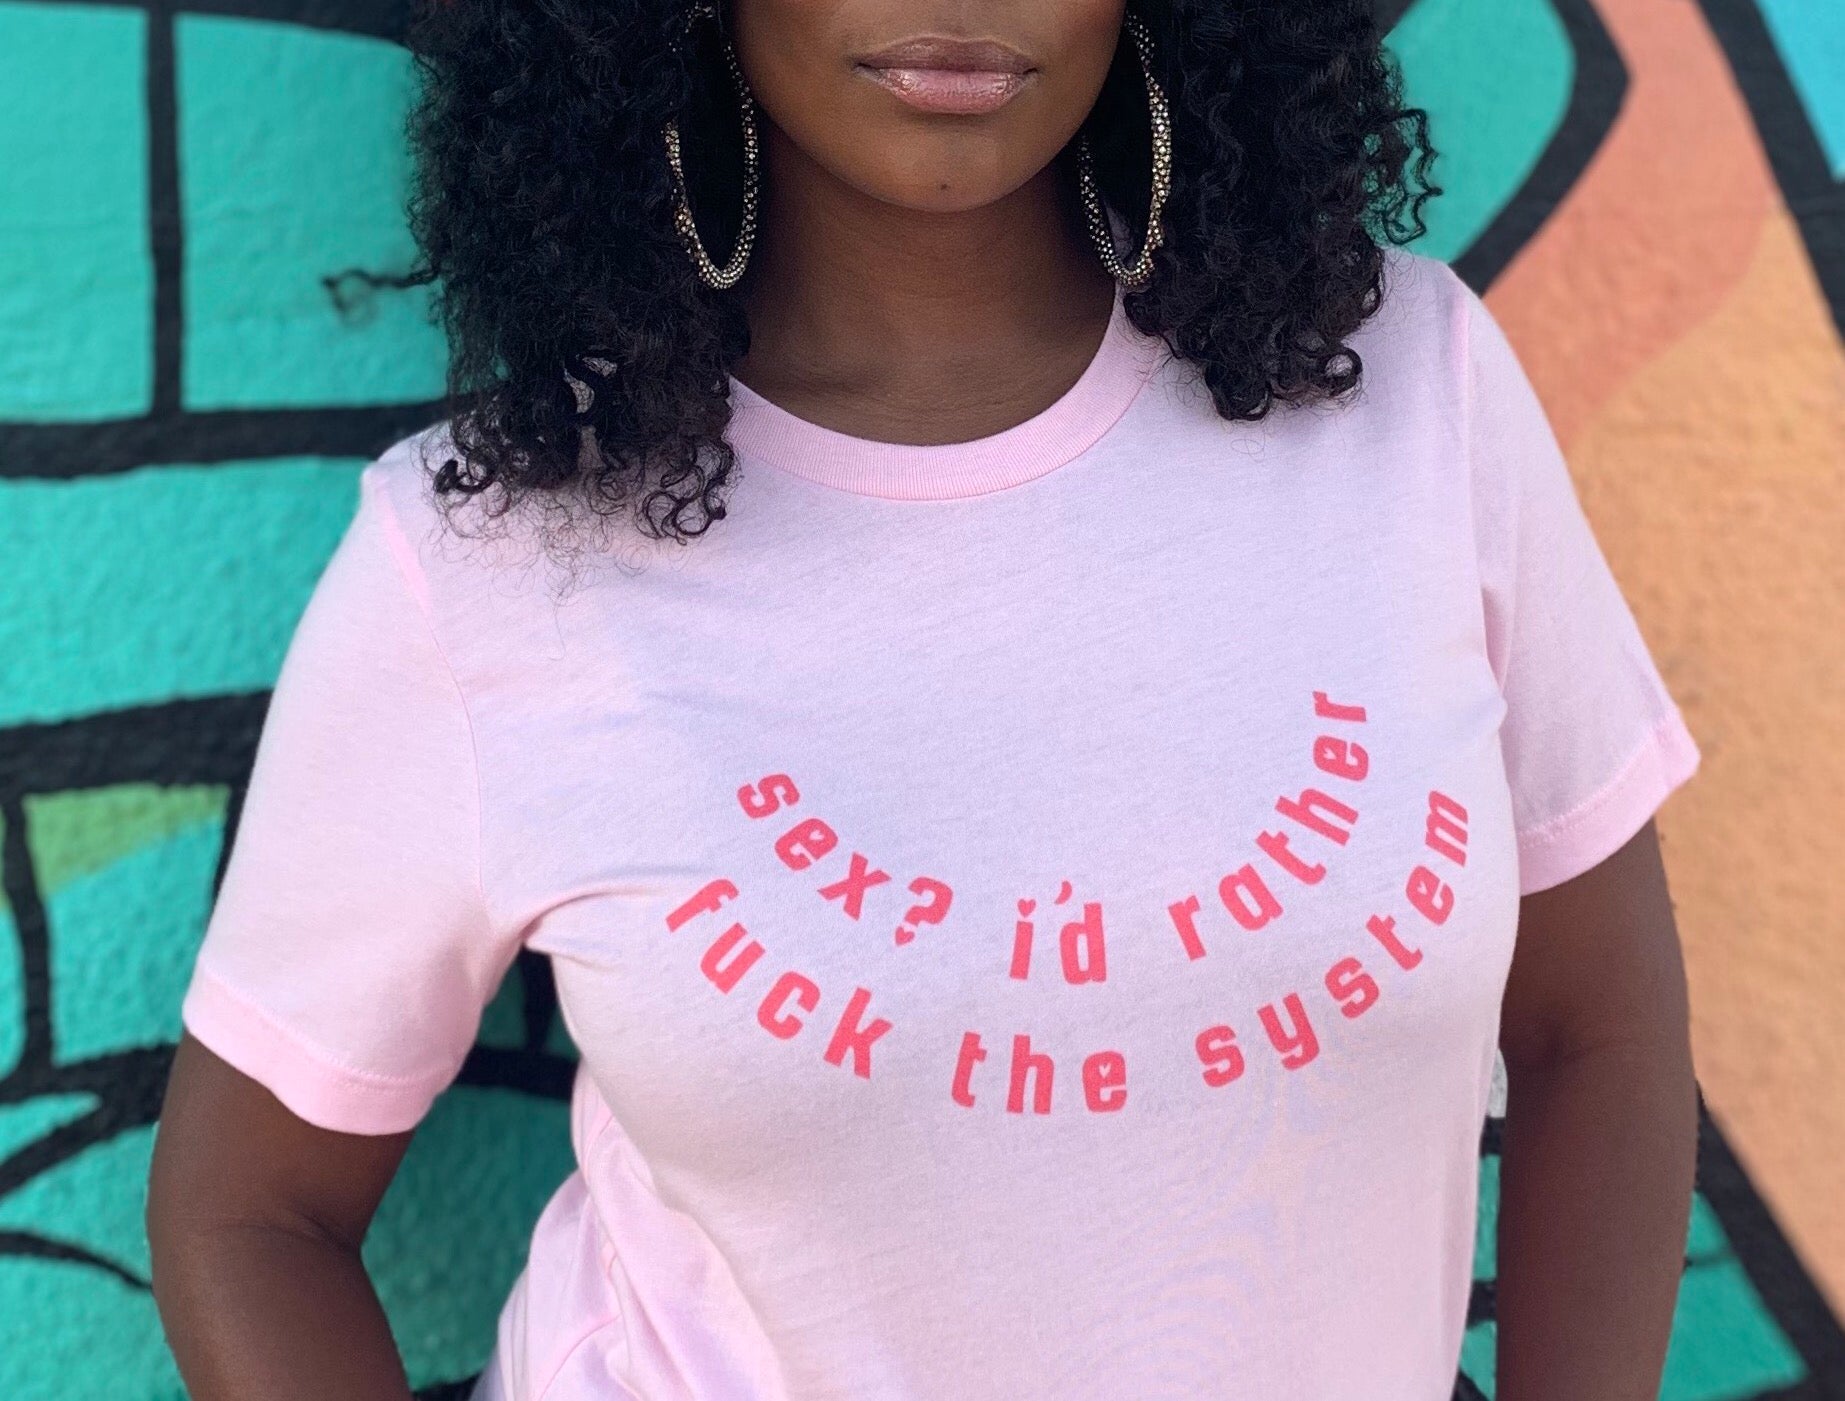 Women's rights t shirt in pink proclaiming "Sex? I'd Rather Fuck The System" in red writing